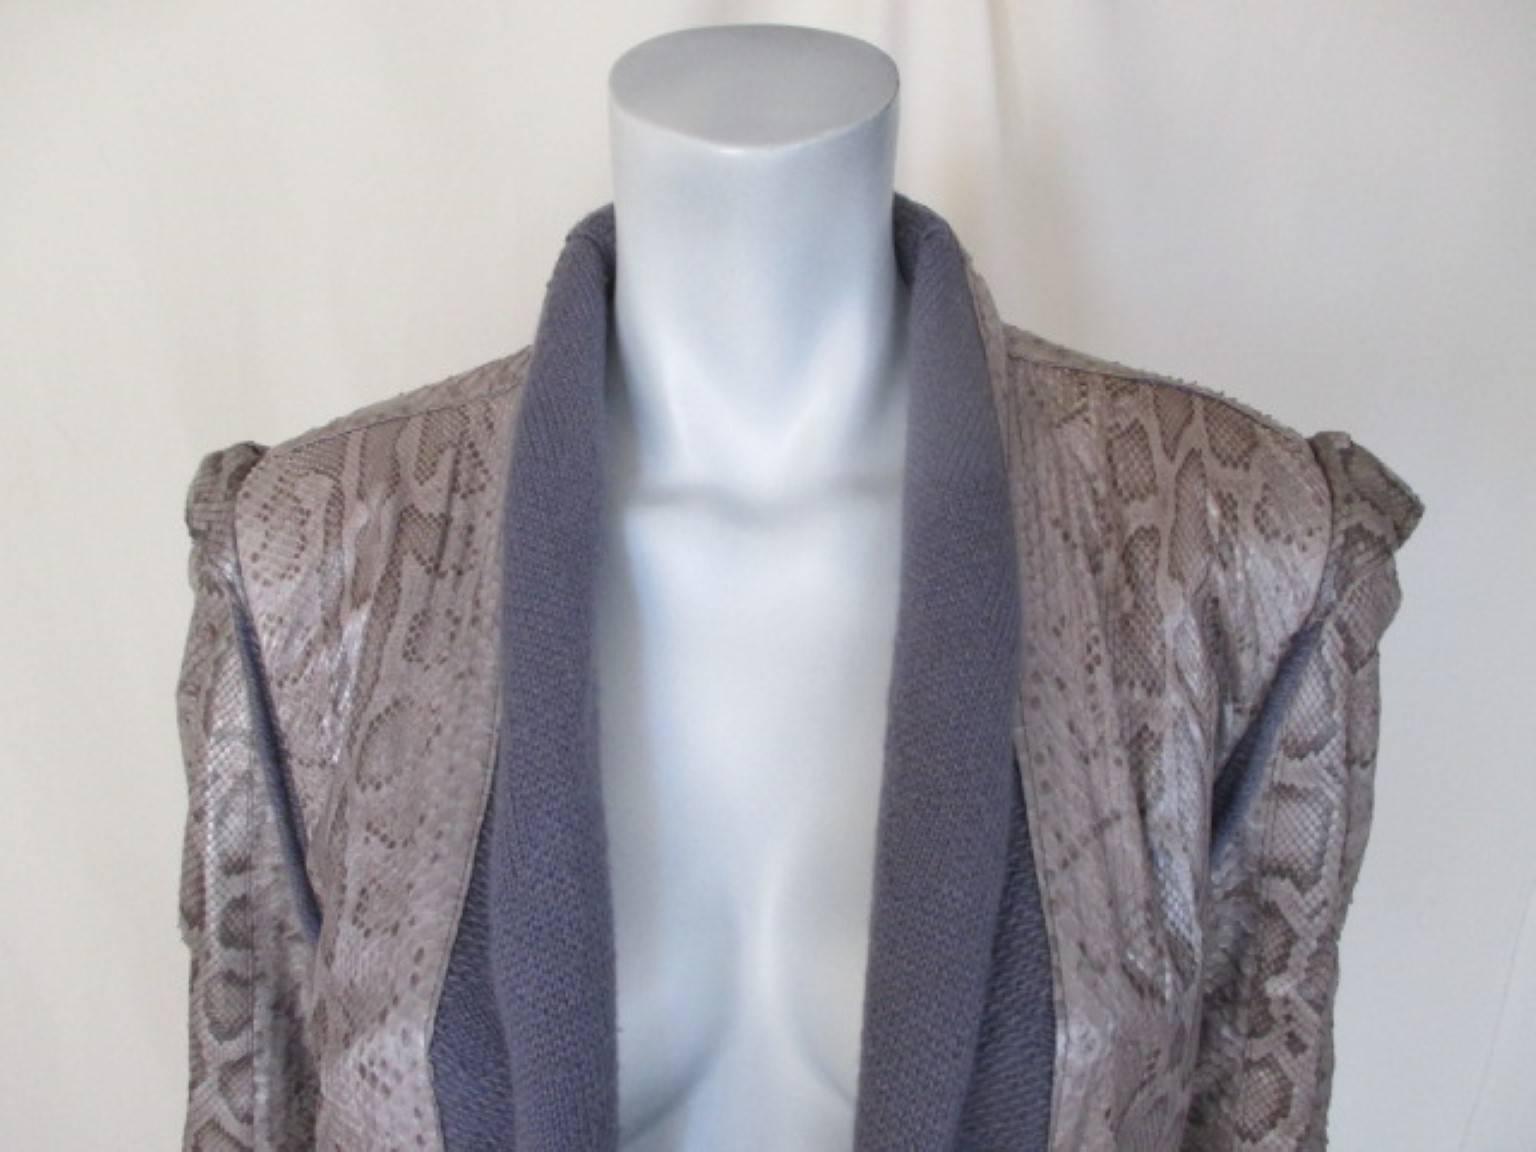 Fabulous original 70s knit coat with old snakeskin appliqués made in Ibiza. designer Ginger.
Soft knit (wool blend) with supple snakeskin appliqués throughout.
No closures, each side has slide in pockets. 
Very good pre-owned condition with minimum